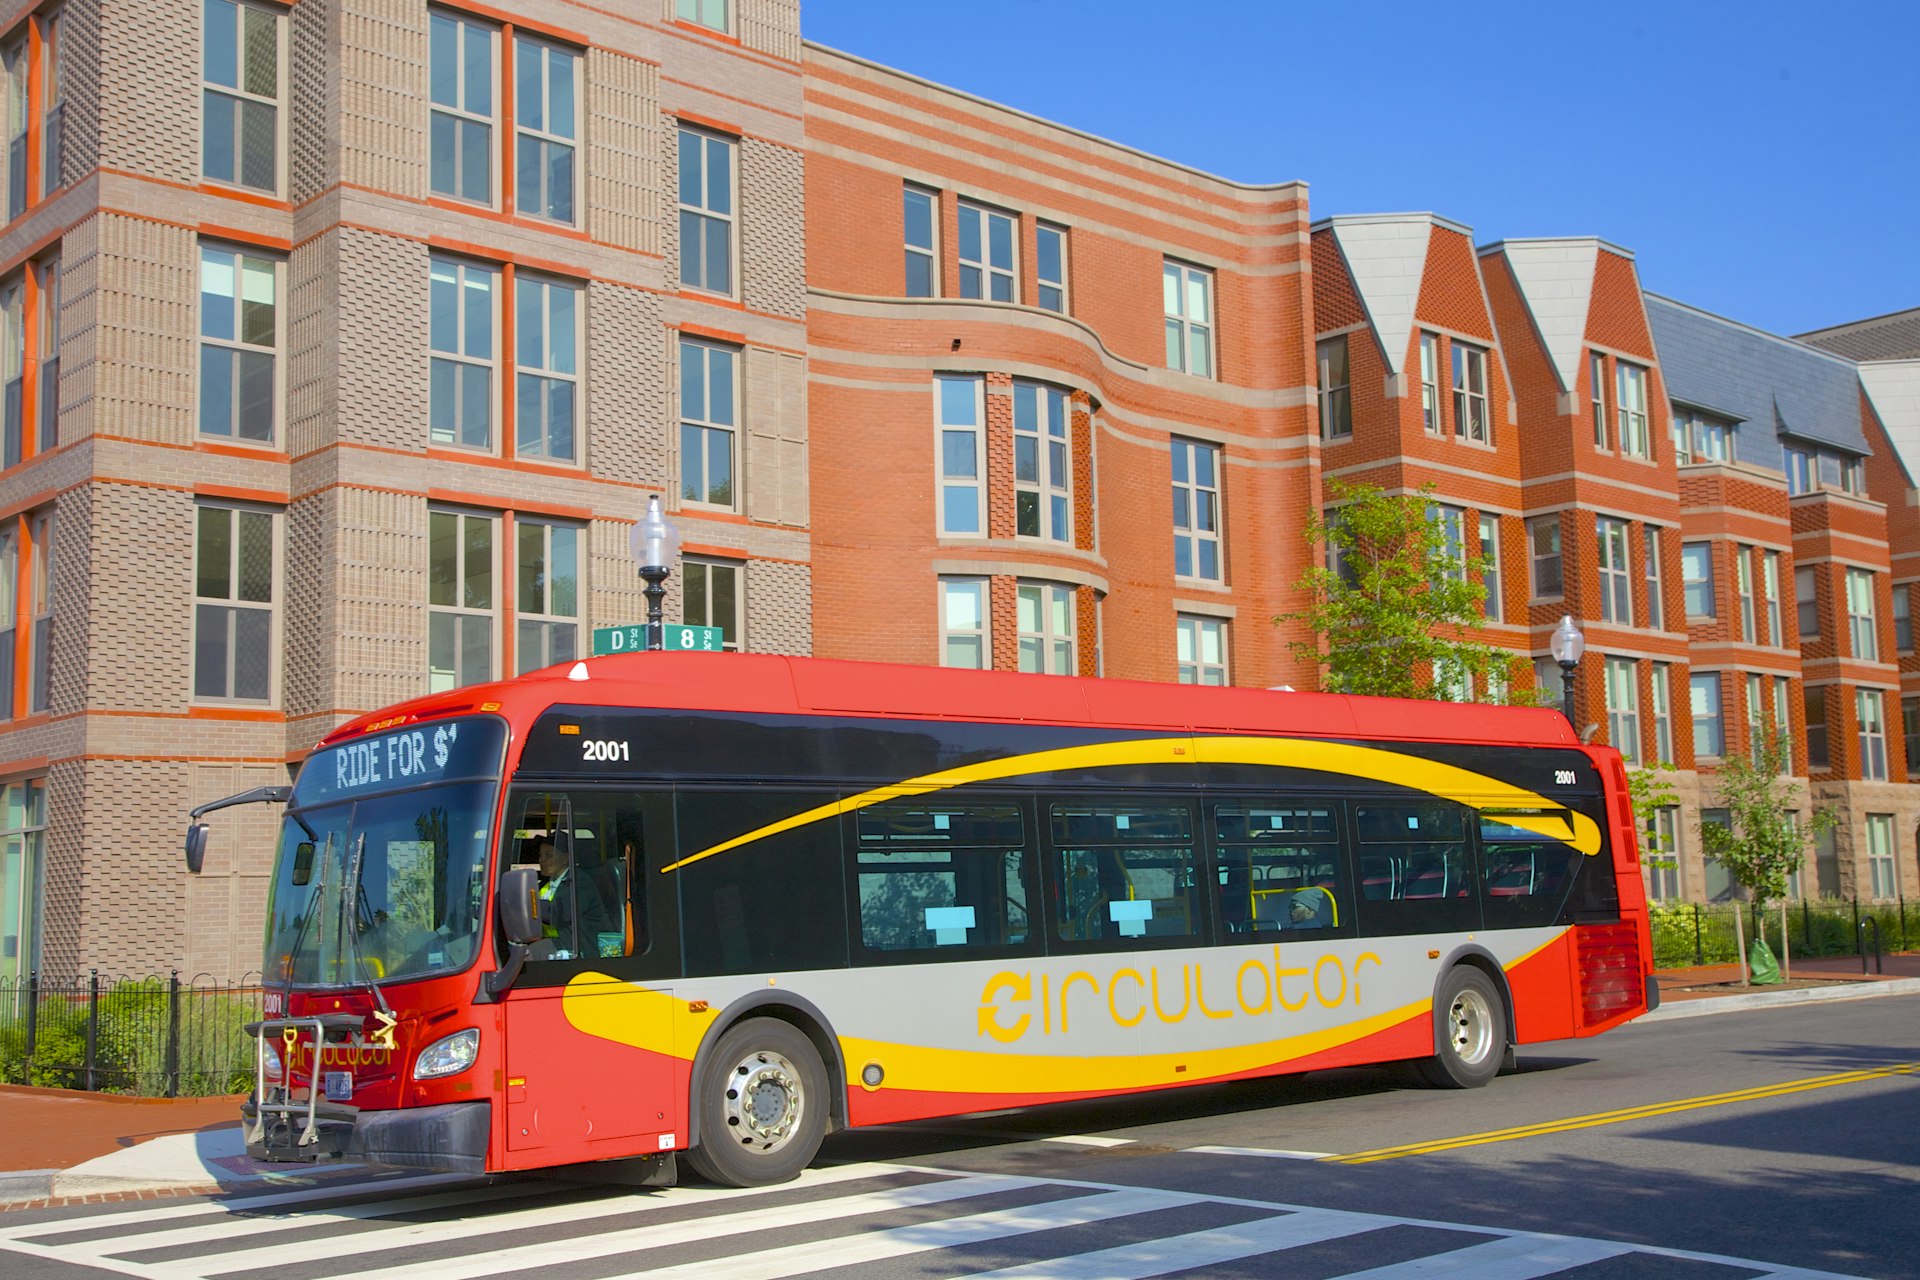 A bright red and yellow DC Circulator bus drives past a tan and orange brick building in Washington, DC